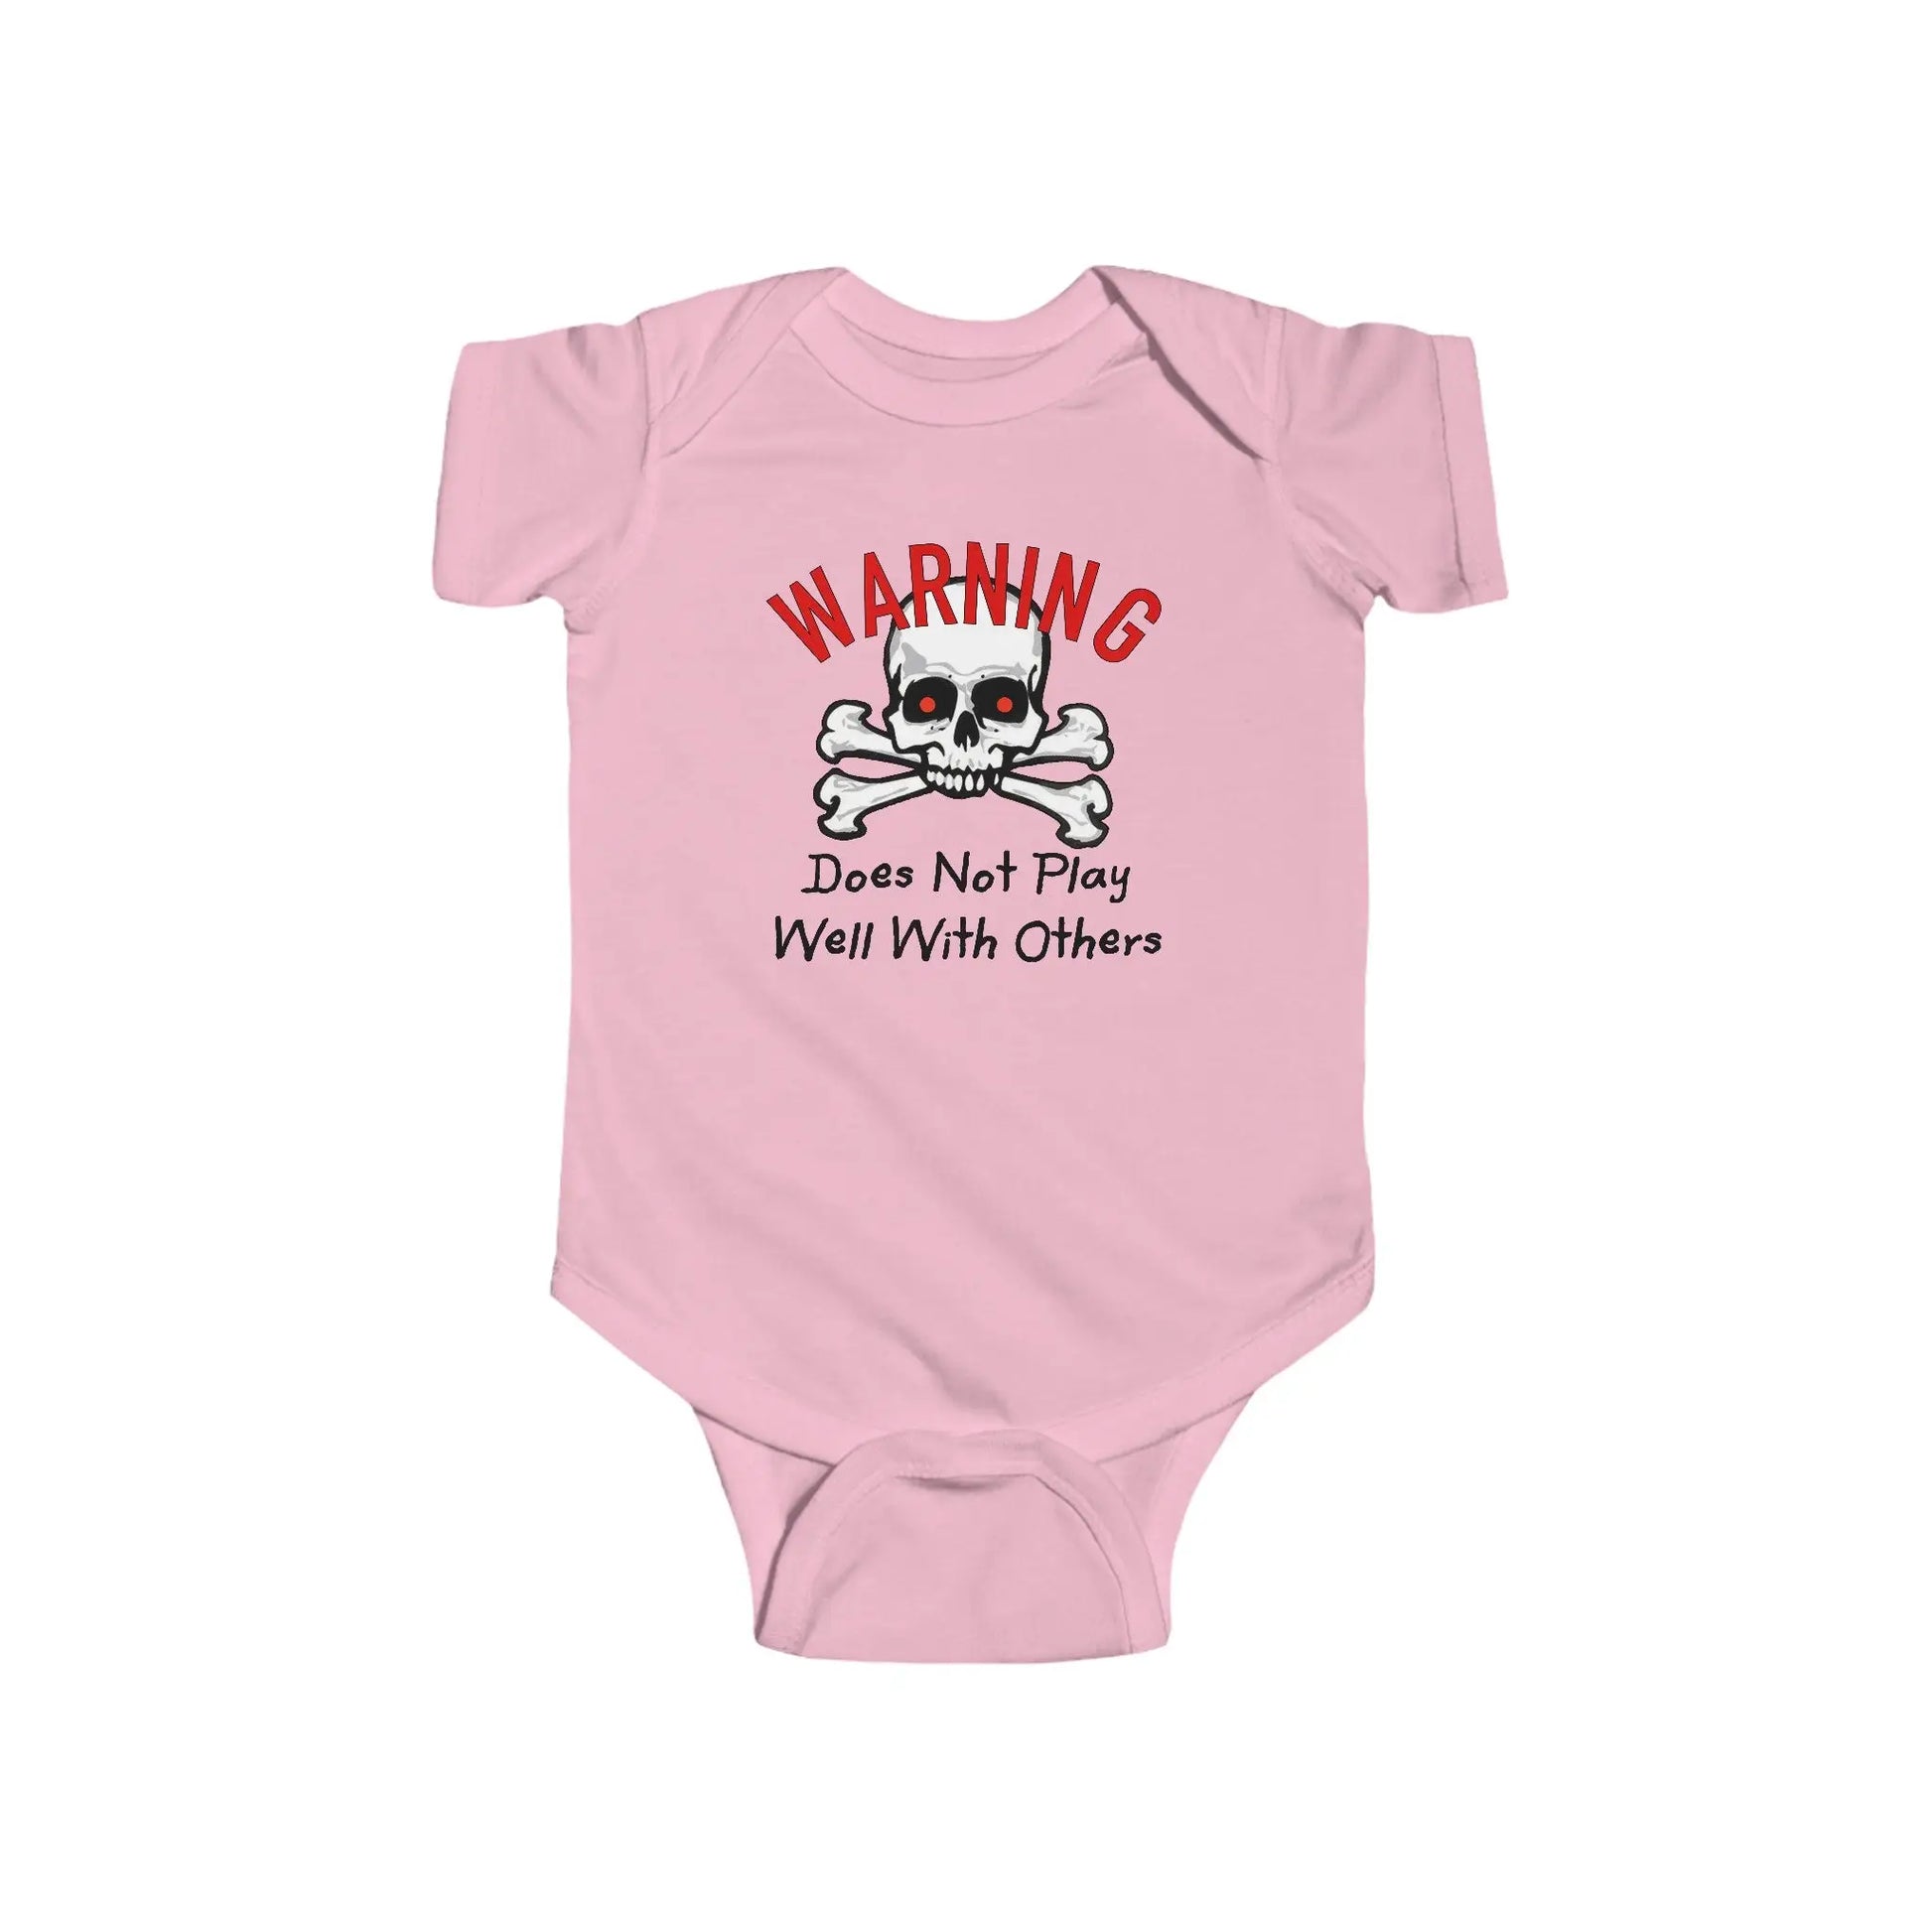 Warning Does Not Play Well With Others Infant Bodysuit - Wicked Tees